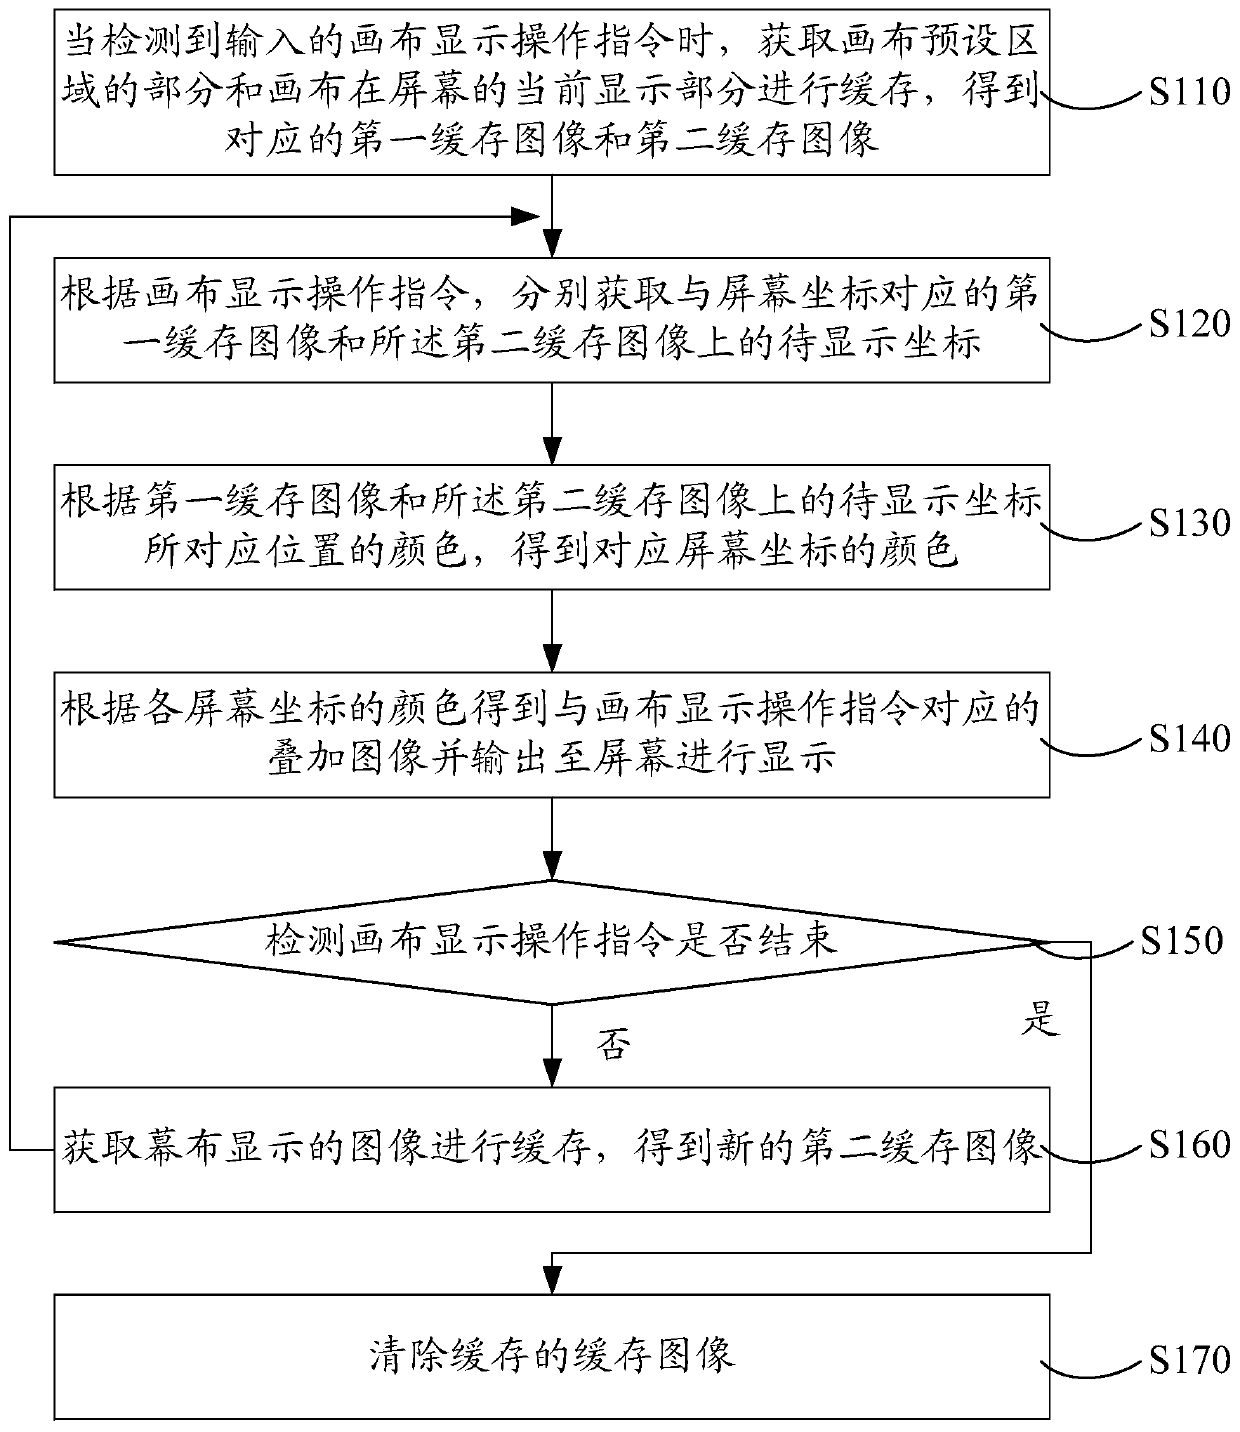 Canvas display control method and system